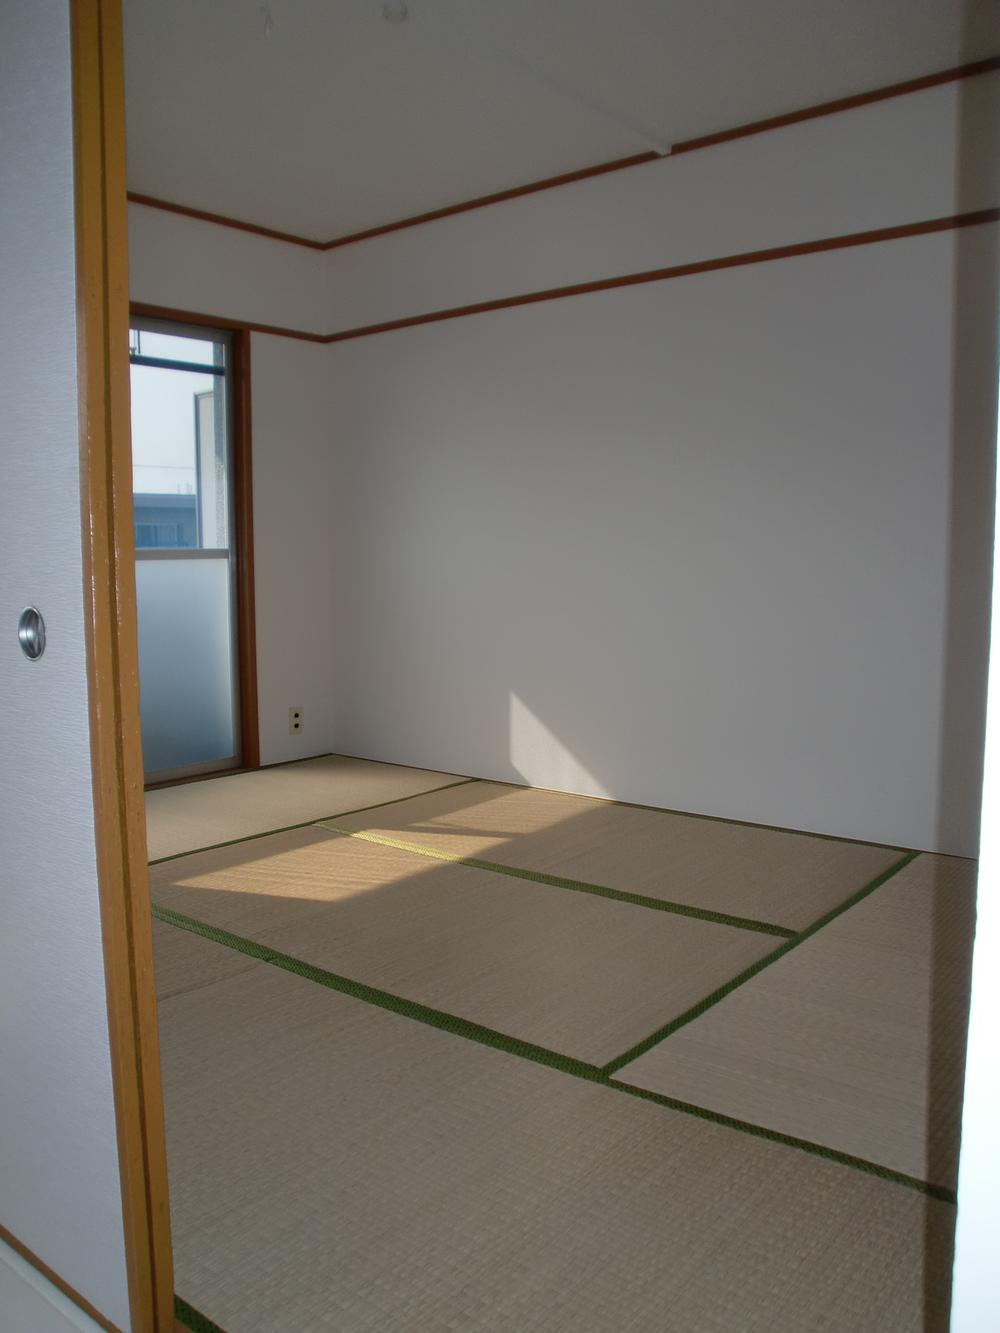 Non-living room. Facing south in the bright Japanese-style room.